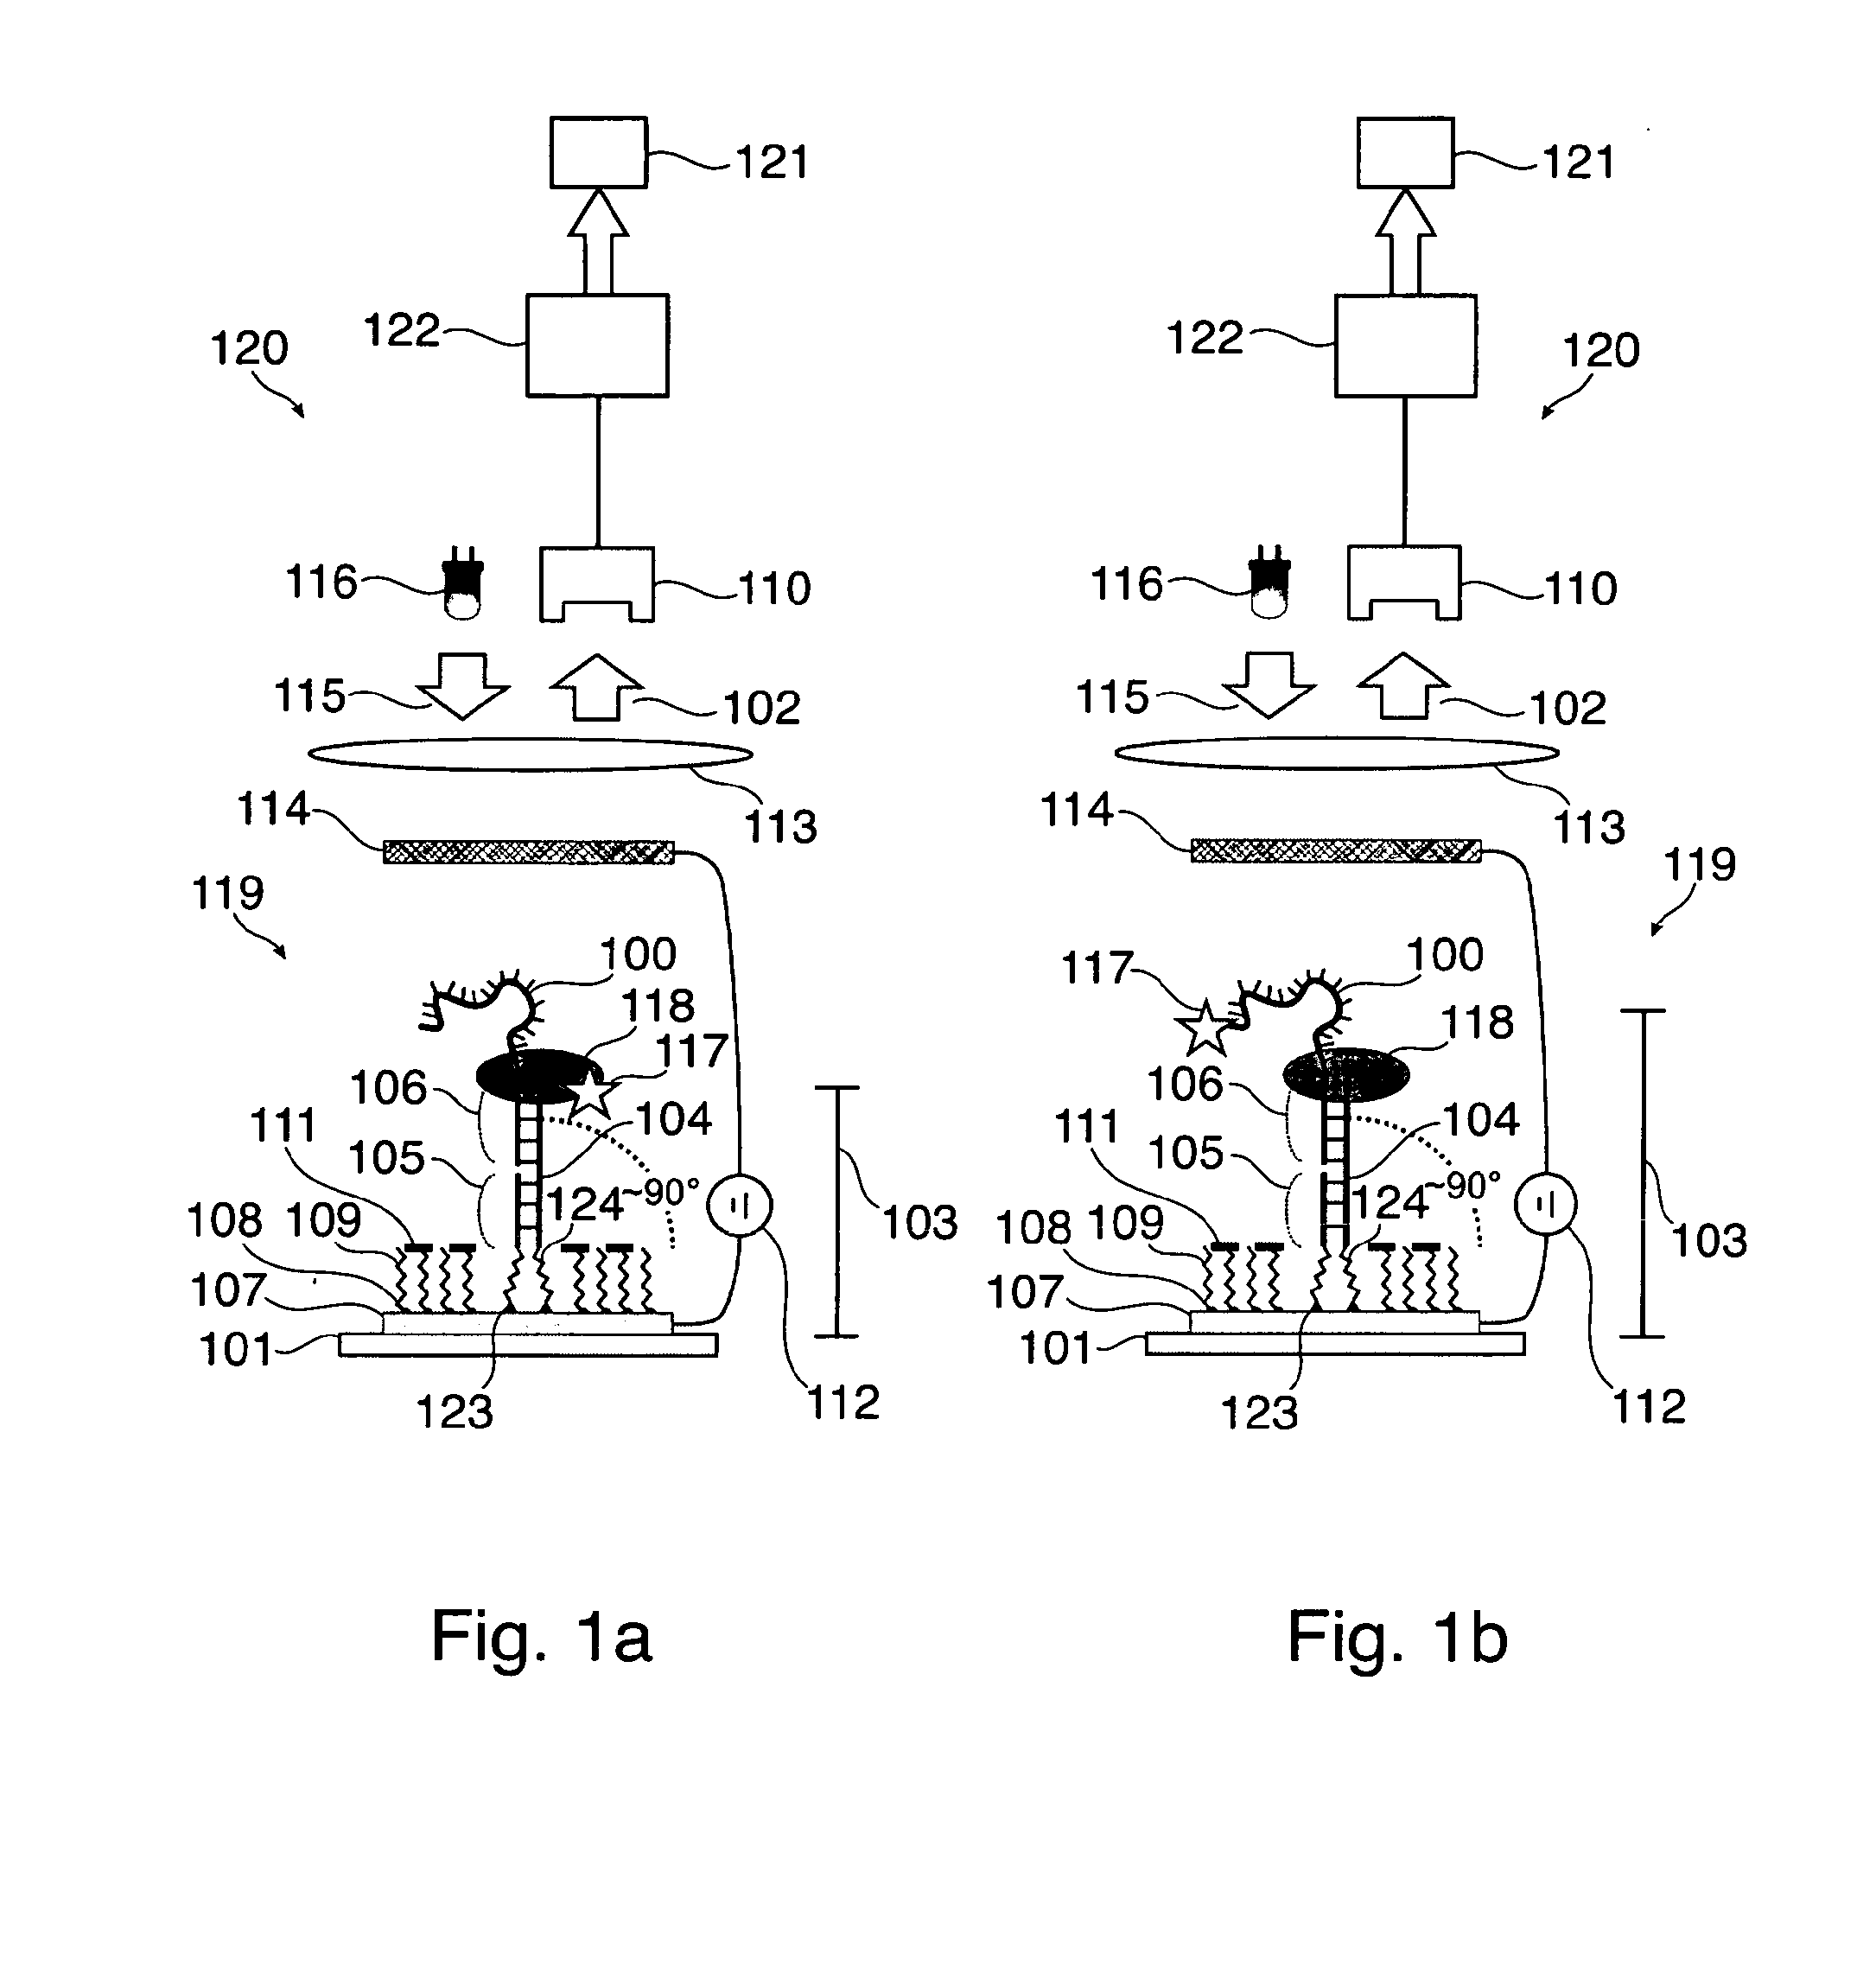 Method for sequencing a template nucleic acid immobilized on a substrate